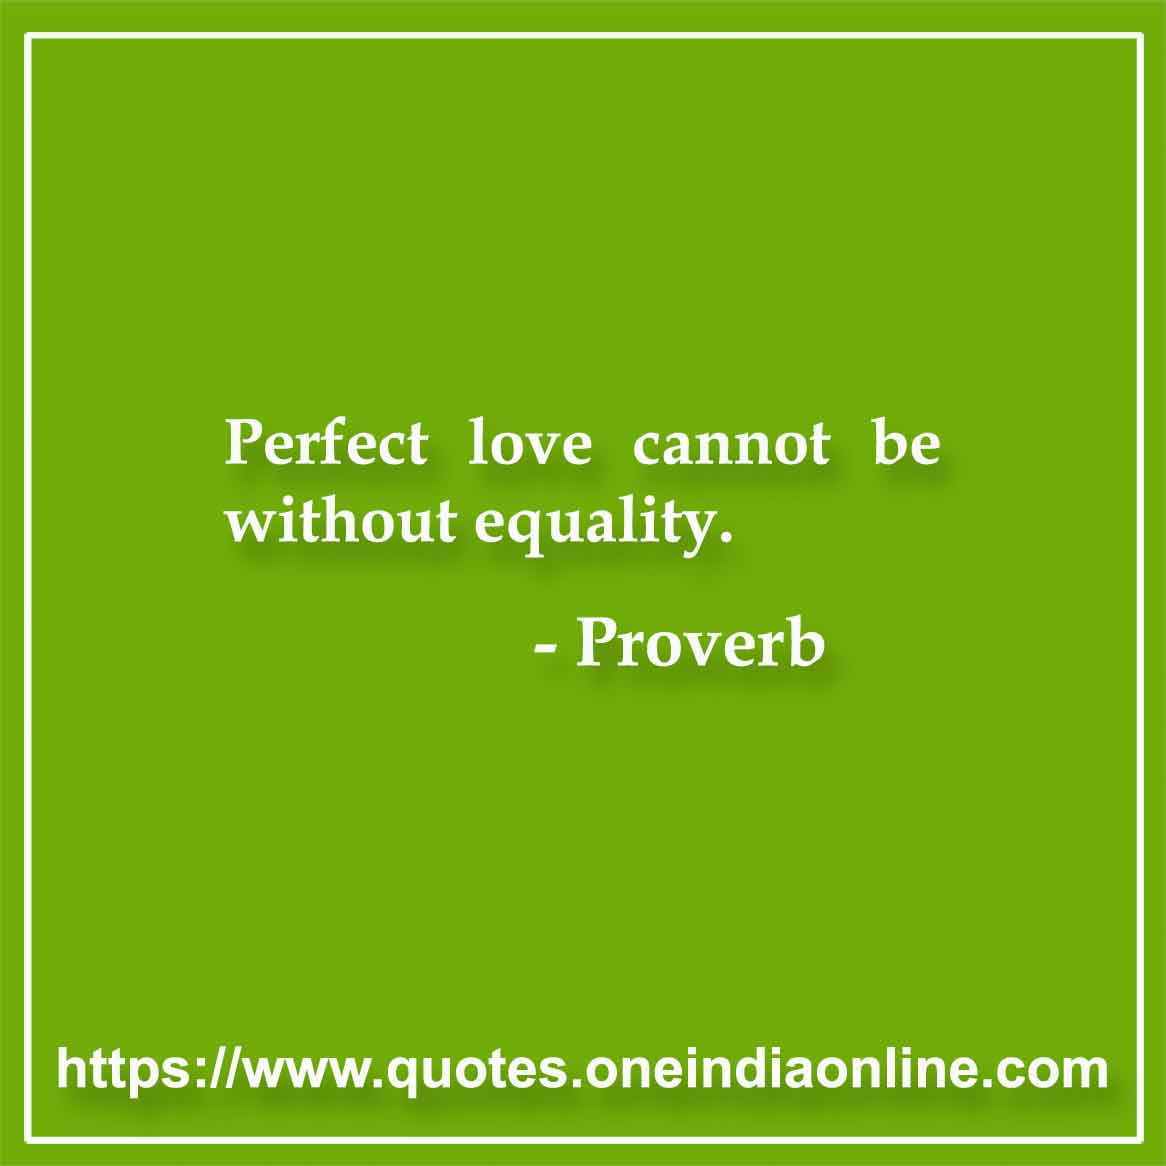 Perfect love cannot be without equality. 

Scottish Proverb